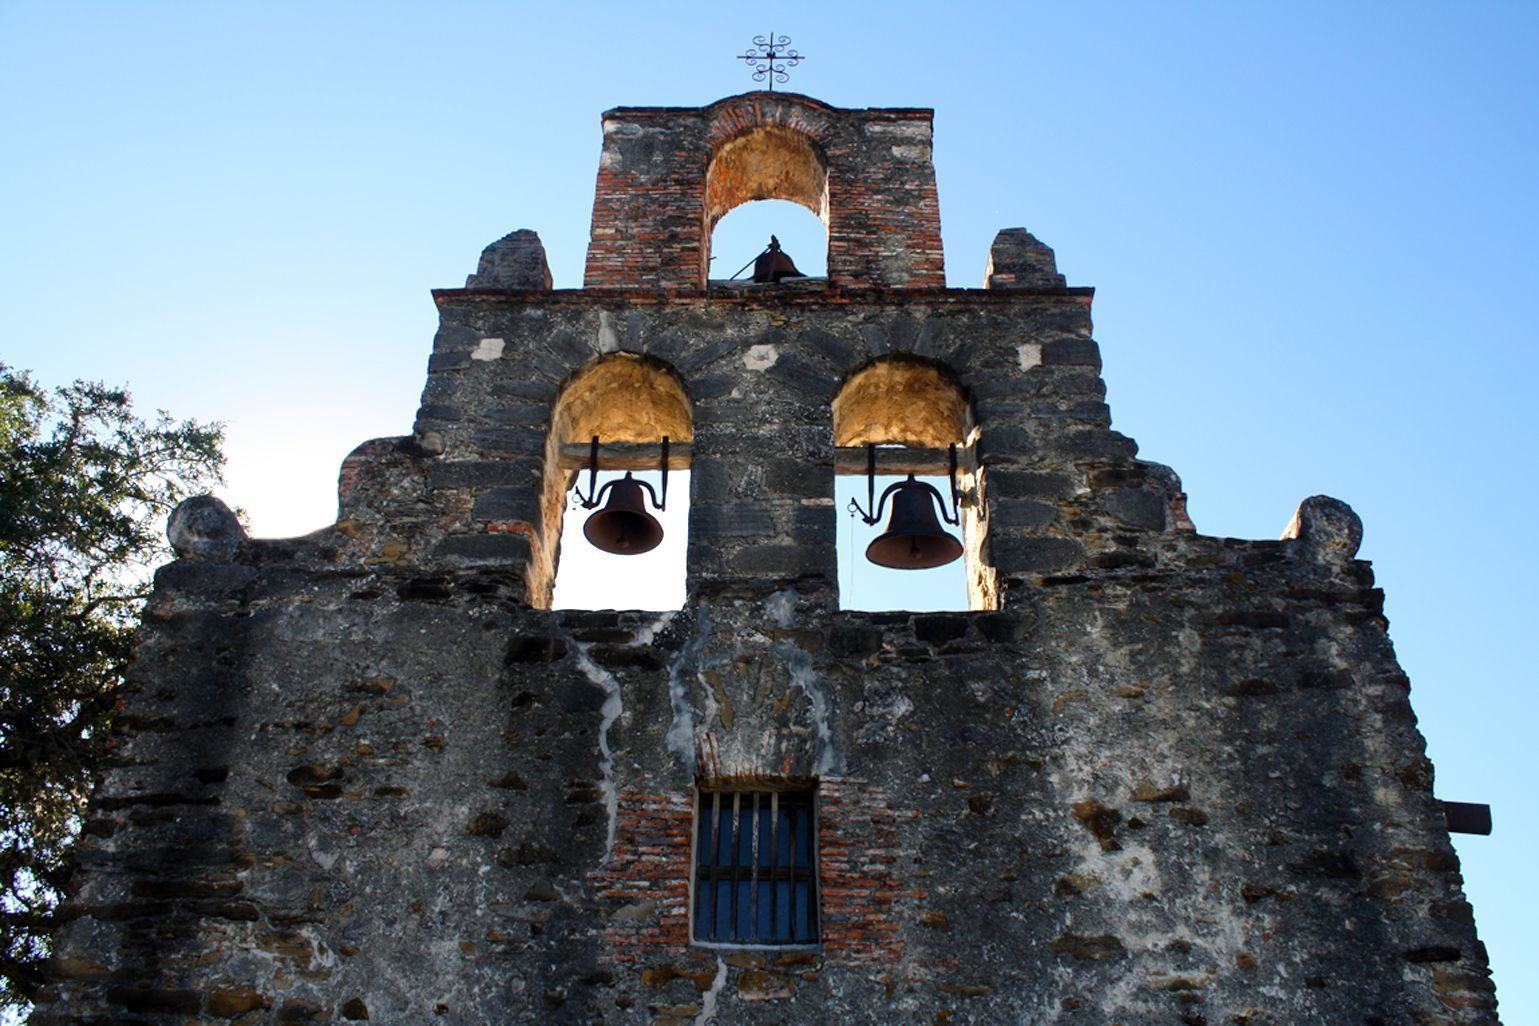 A part of Mission Espada's ranch is located 30 miles south-east, outside of Floresville, TX.